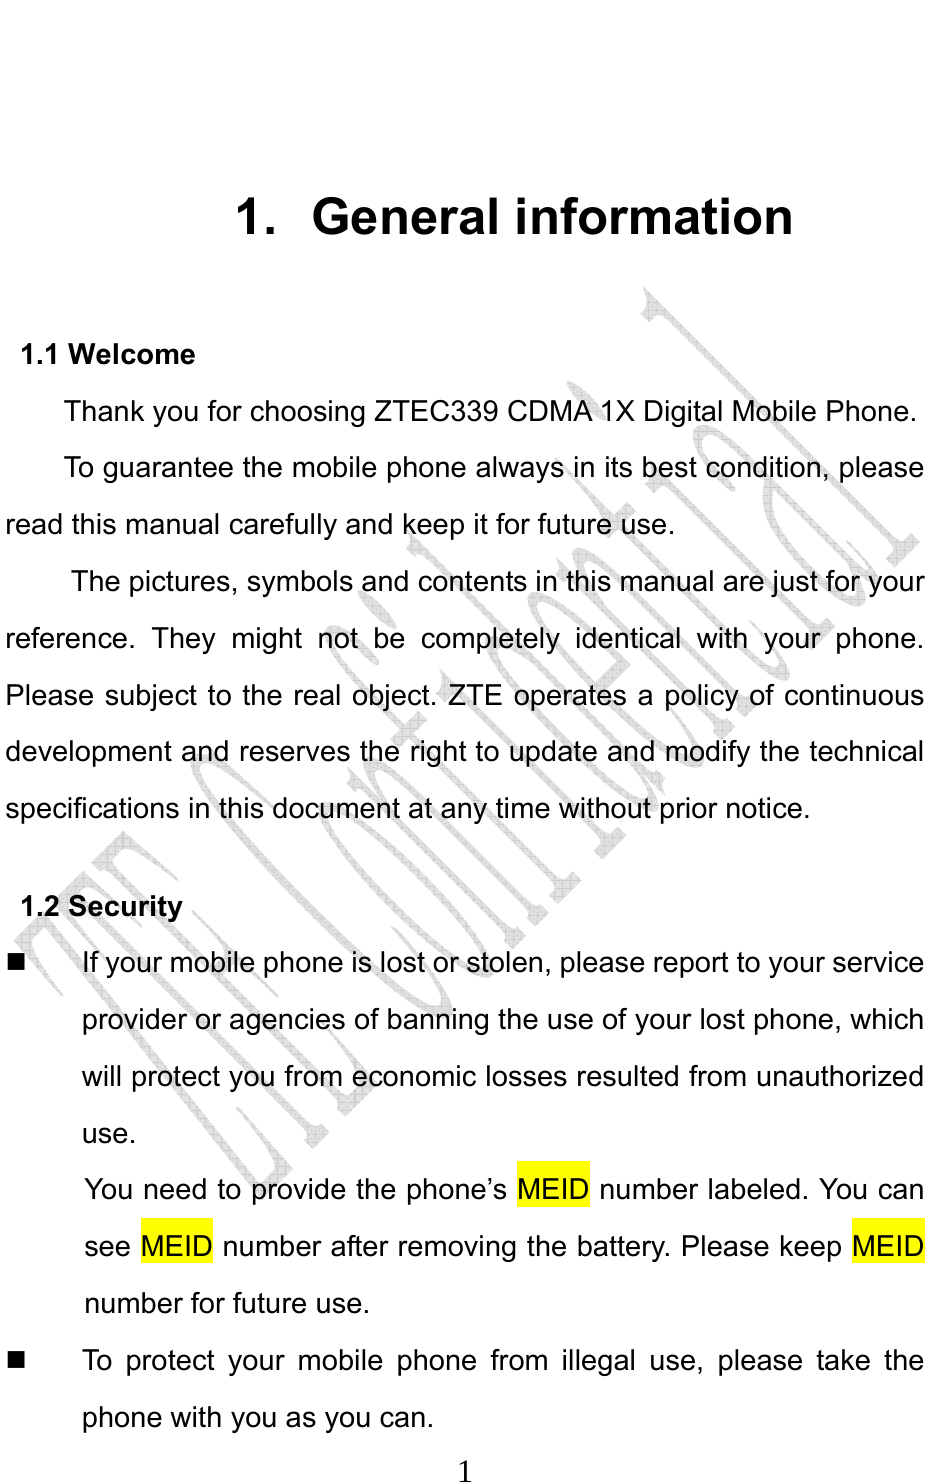                              1 1. General information 1.1 Welcome Thank you for choosing ZTEC339 CDMA 1X Digital Mobile Phone.   To guarantee the mobile phone always in its best condition, please read this manual carefully and keep it for future use. The pictures, symbols and contents in this manual are just for your reference. They might not be completely identical with your phone. Please subject to the real object. ZTE operates a policy of continuous development and reserves the right to update and modify the technical specifications in this document at any time without prior notice. 1.2 Security   If your mobile phone is lost or stolen, please report to your service provider or agencies of banning the use of your lost phone, which will protect you from economic losses resulted from unauthorized use. You need to provide the phone’s MEID number labeled. You can see MEID number after removing the battery. Please keep MEID number for future use.     To protect your mobile phone from illegal use, please take the phone with you as you can. 